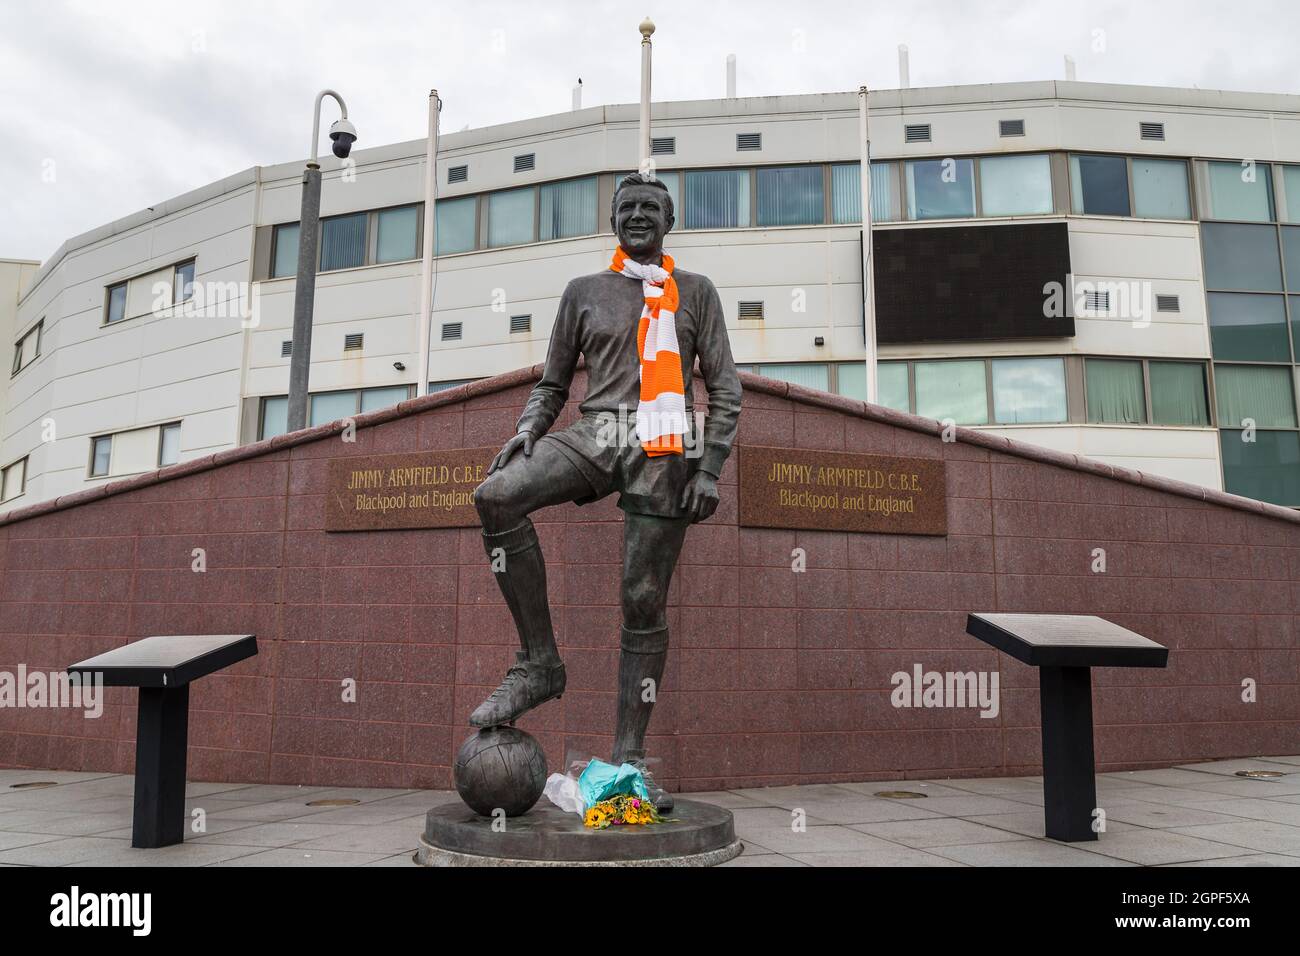 A statue of the Blackpool FC legend Jimmy Armfield who spent his entire Football League career at Blackpool pictured in an orange and white scarf on a Stock Photo